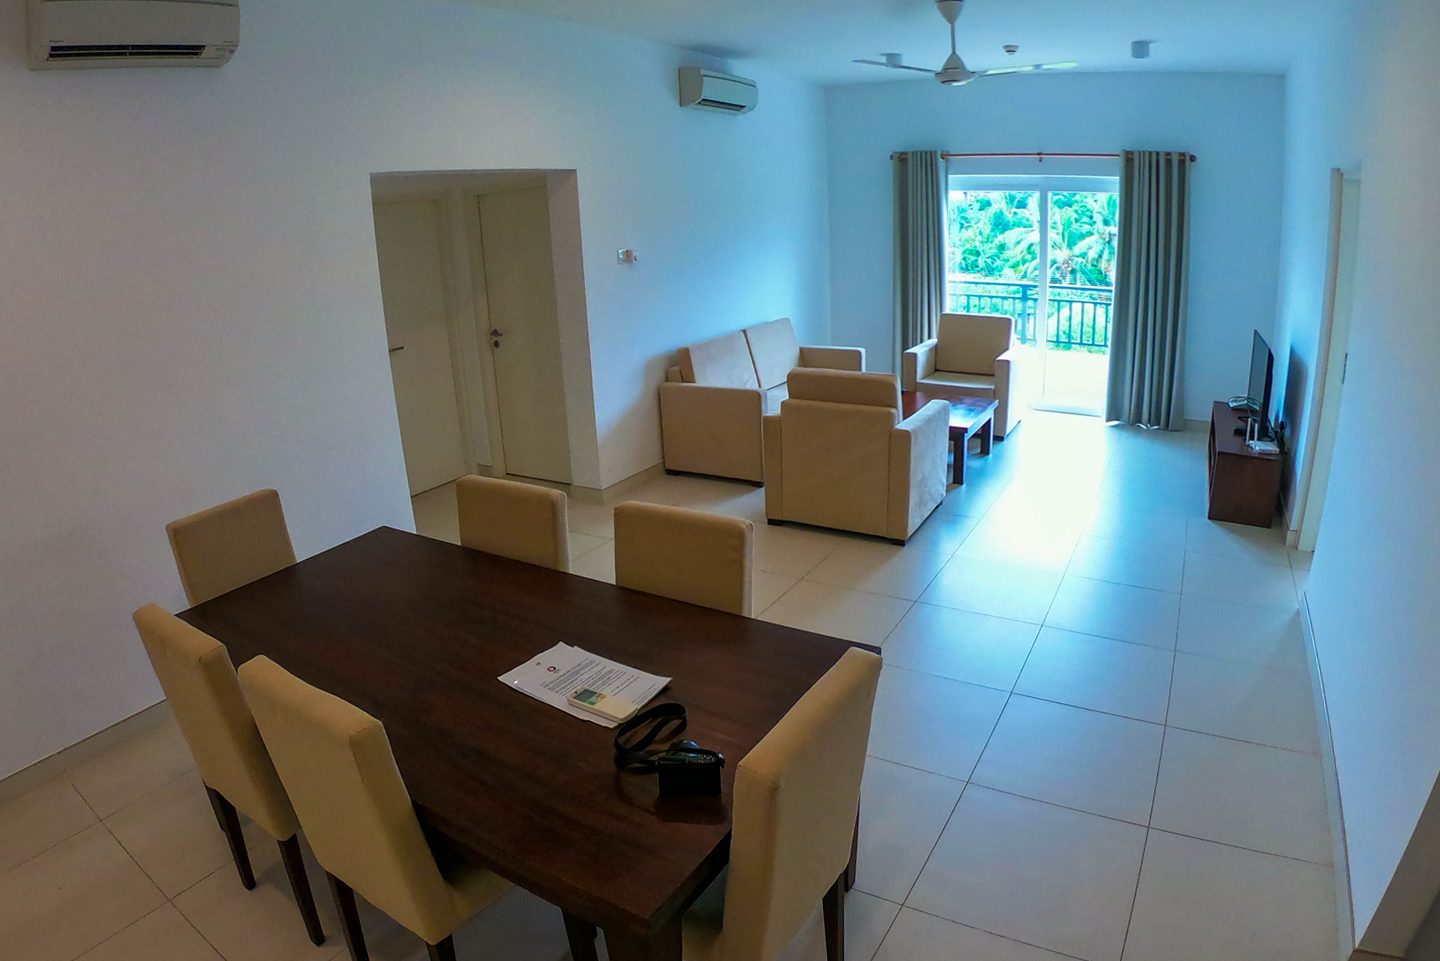 Living area of the self catering apartments in Galle by Fairway Sunset Galle